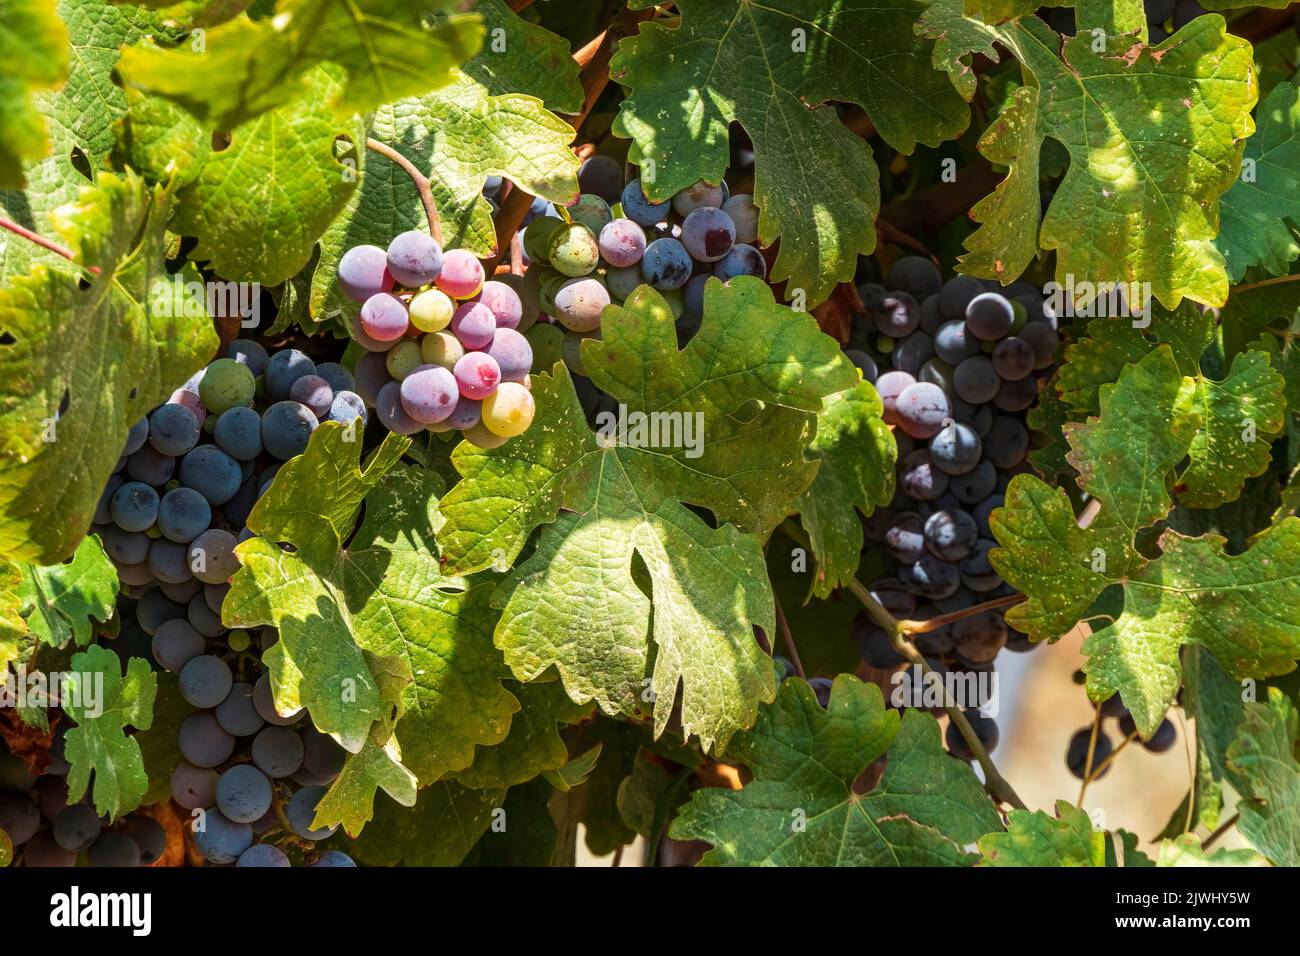 Bunches of ripe black grapes wine grapes close up among green foliage Stock Photo